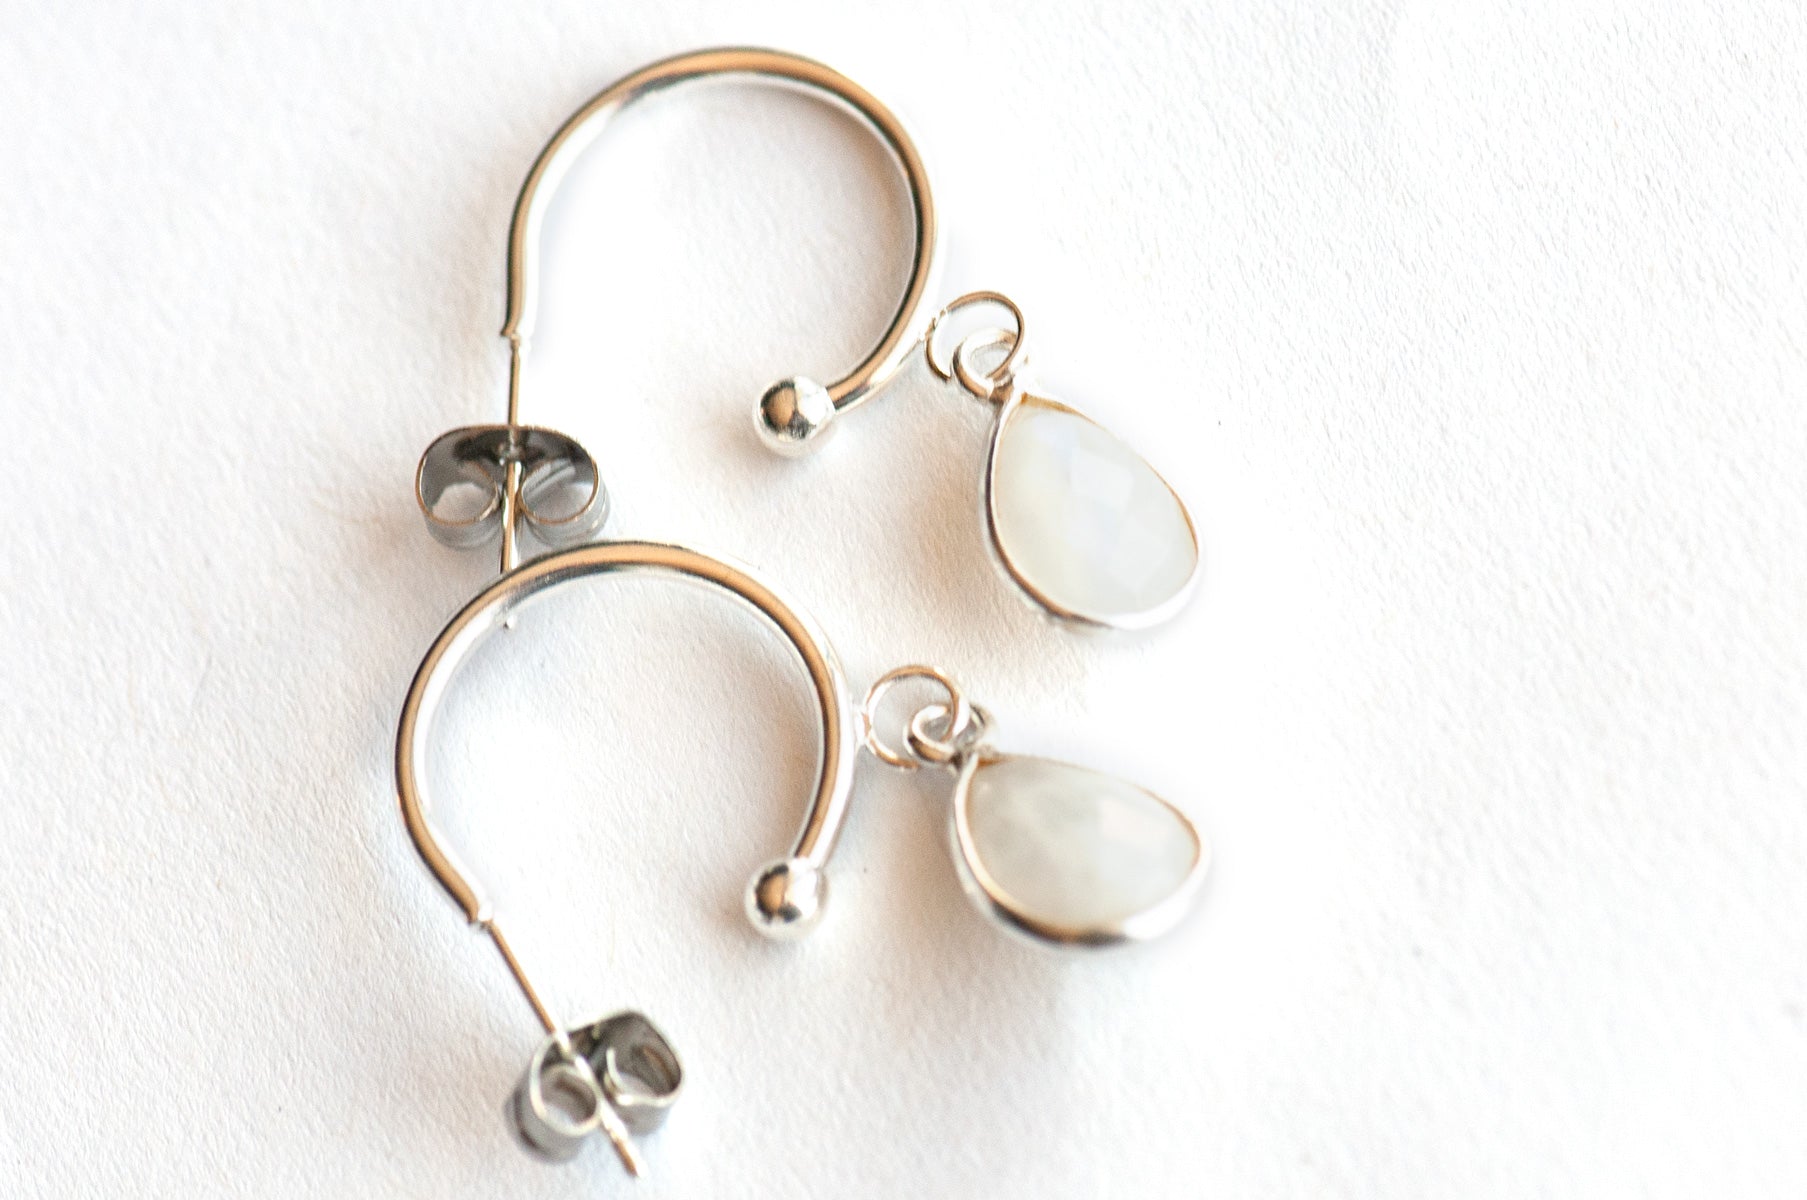 Stunning Sterling Silver bezel-faceted Rainbow Moonstone drops dangle from silver-plated stainless steel half hoop stud earrings. 